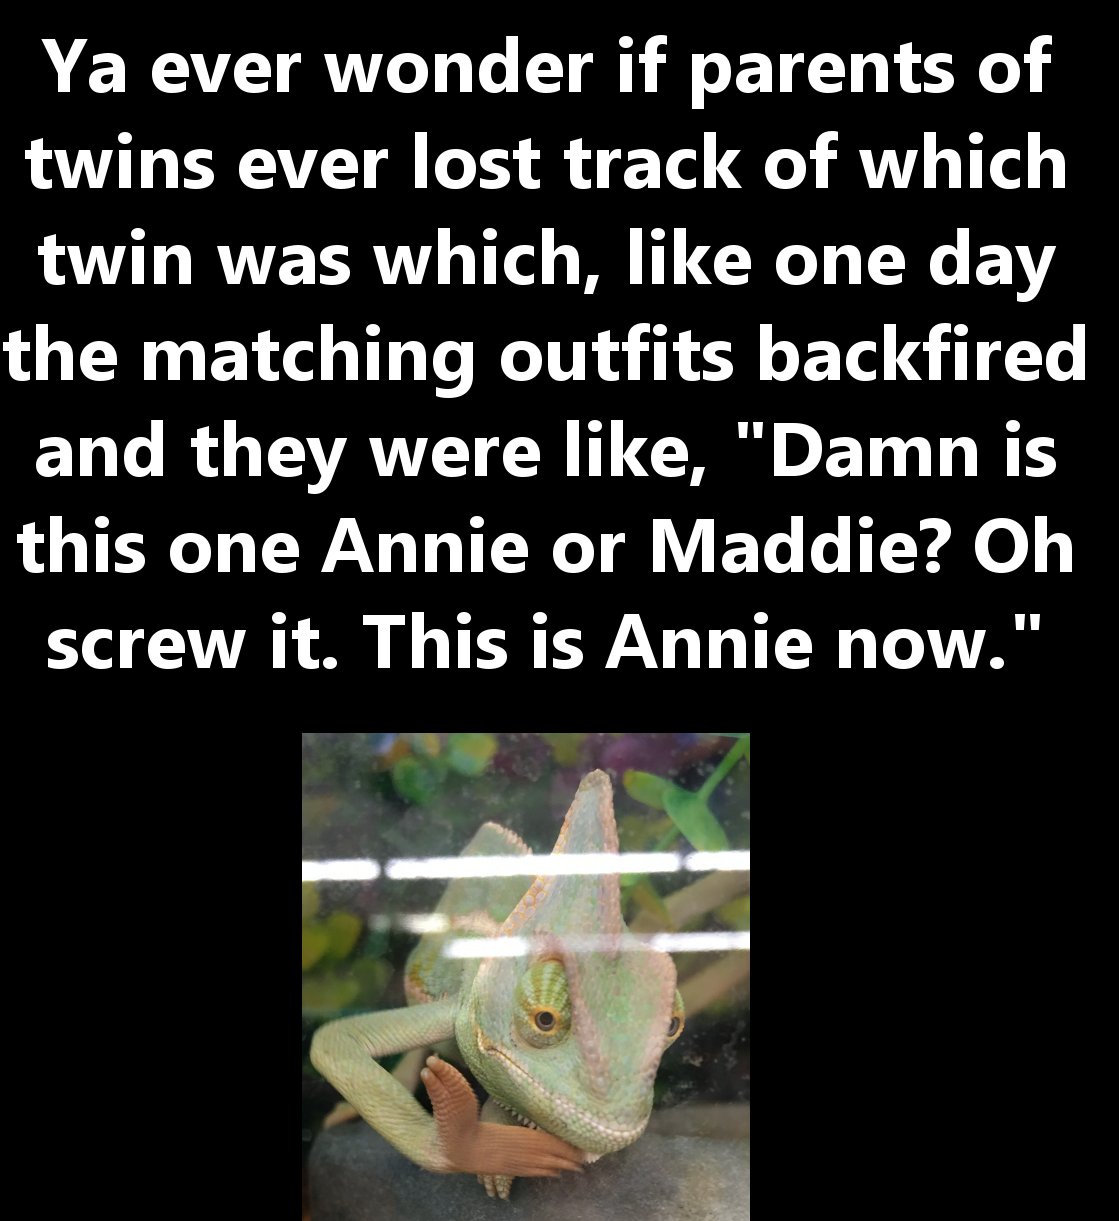 photo caption - Ya ever wonder if parents of twins ever lost track of which twin was which, one day the matching outfits backfired and they were , "Damn is this one Annie or Maddie? Oh screw it. This is Annie now."